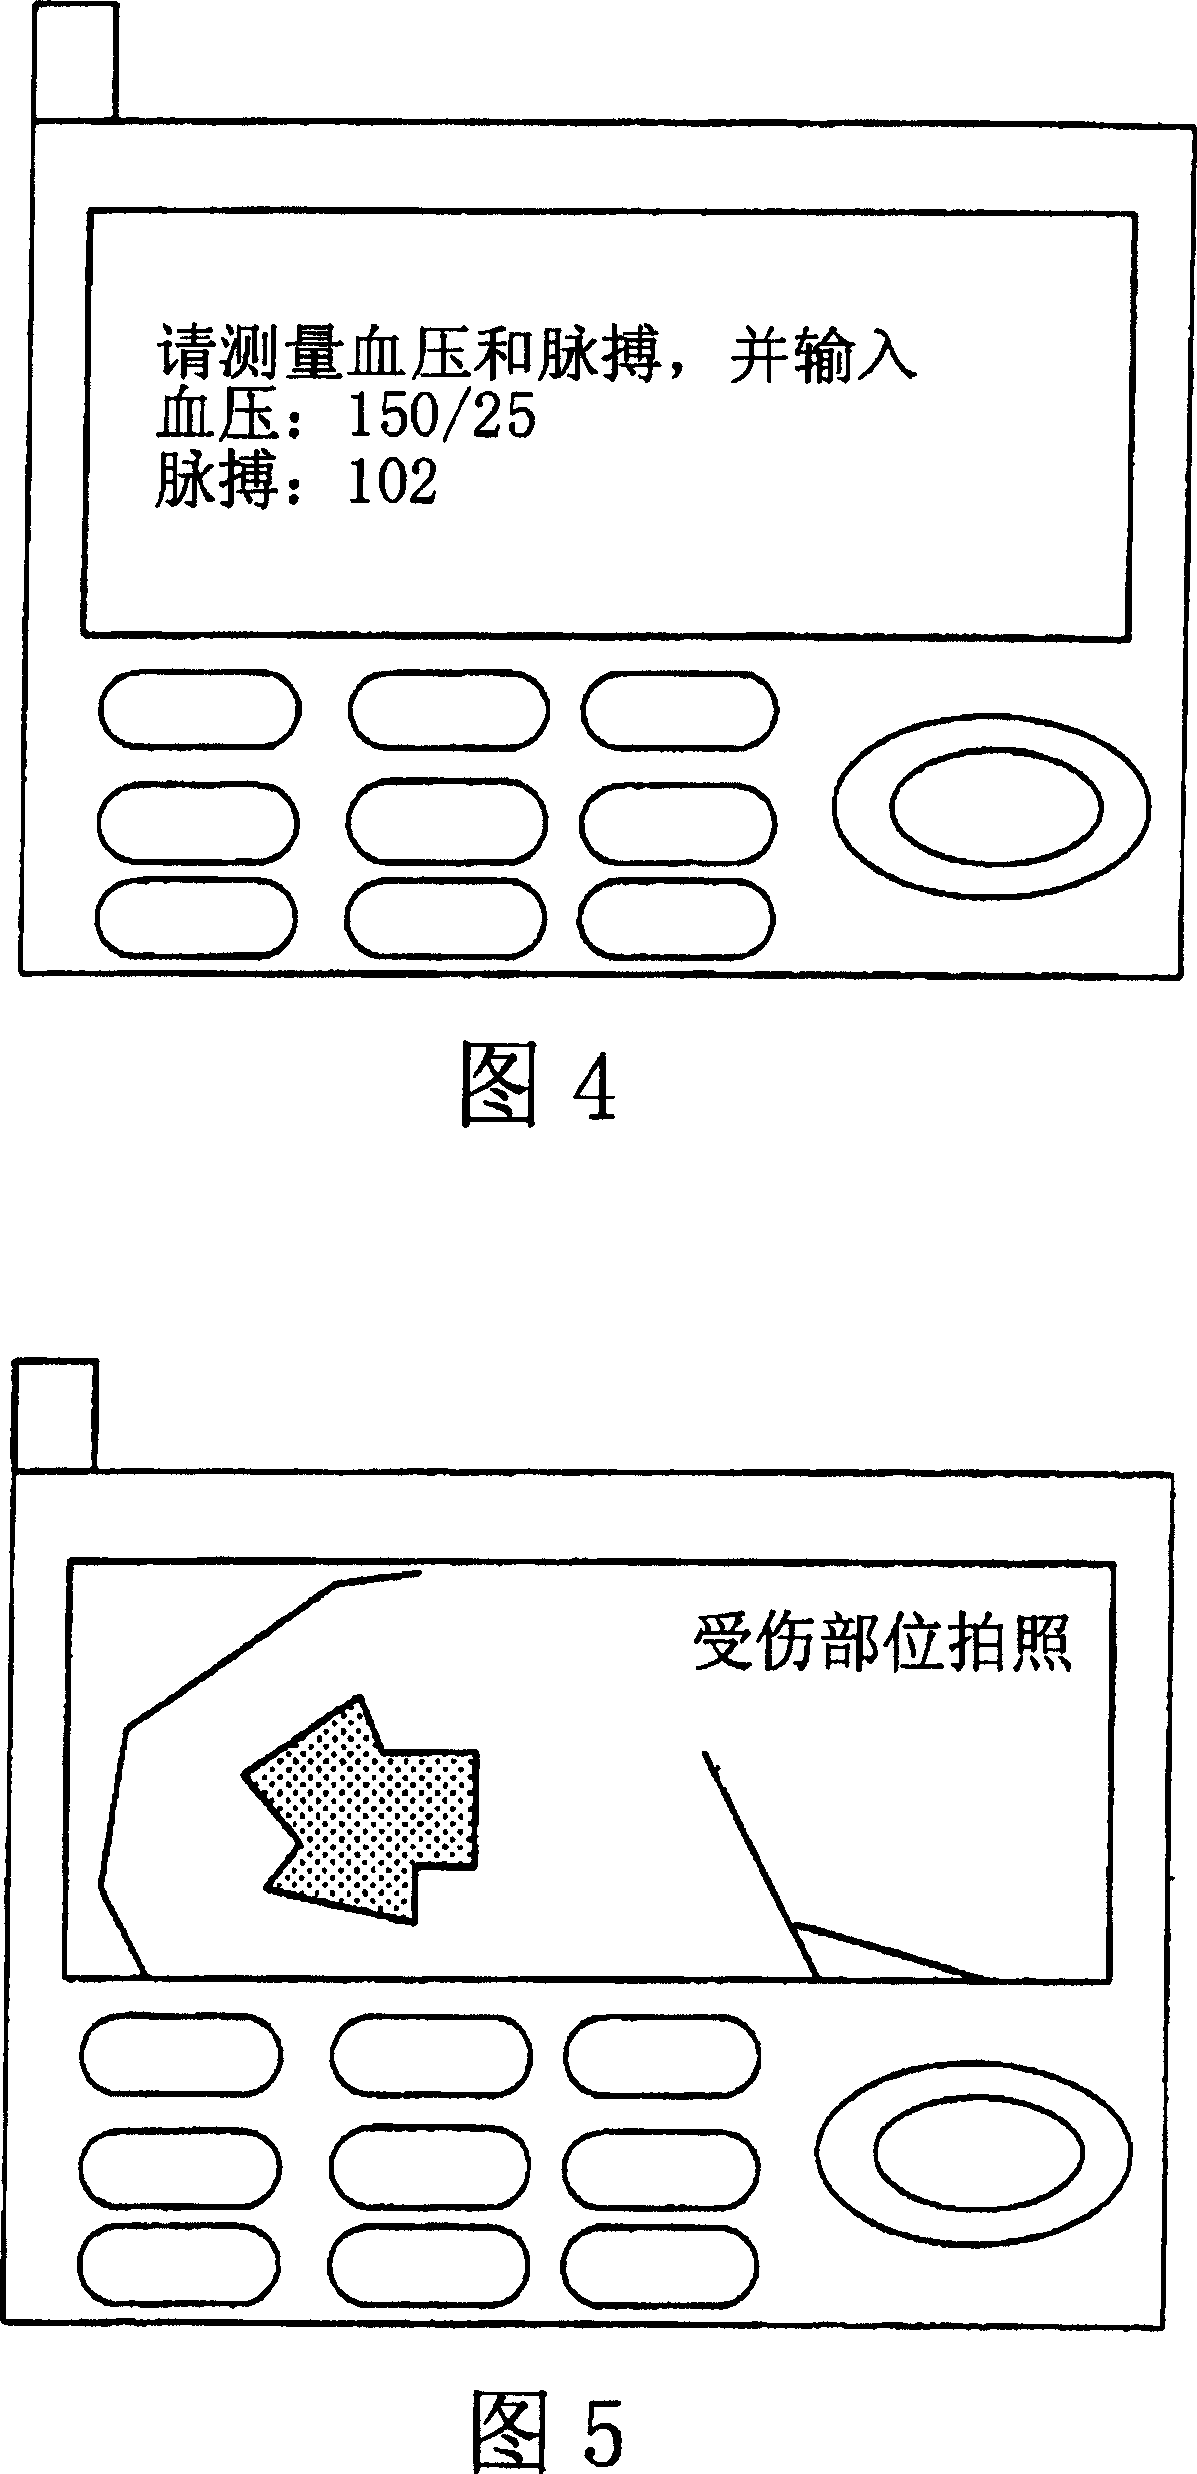 Mobile electronic system and method for health management and mobile electronic device